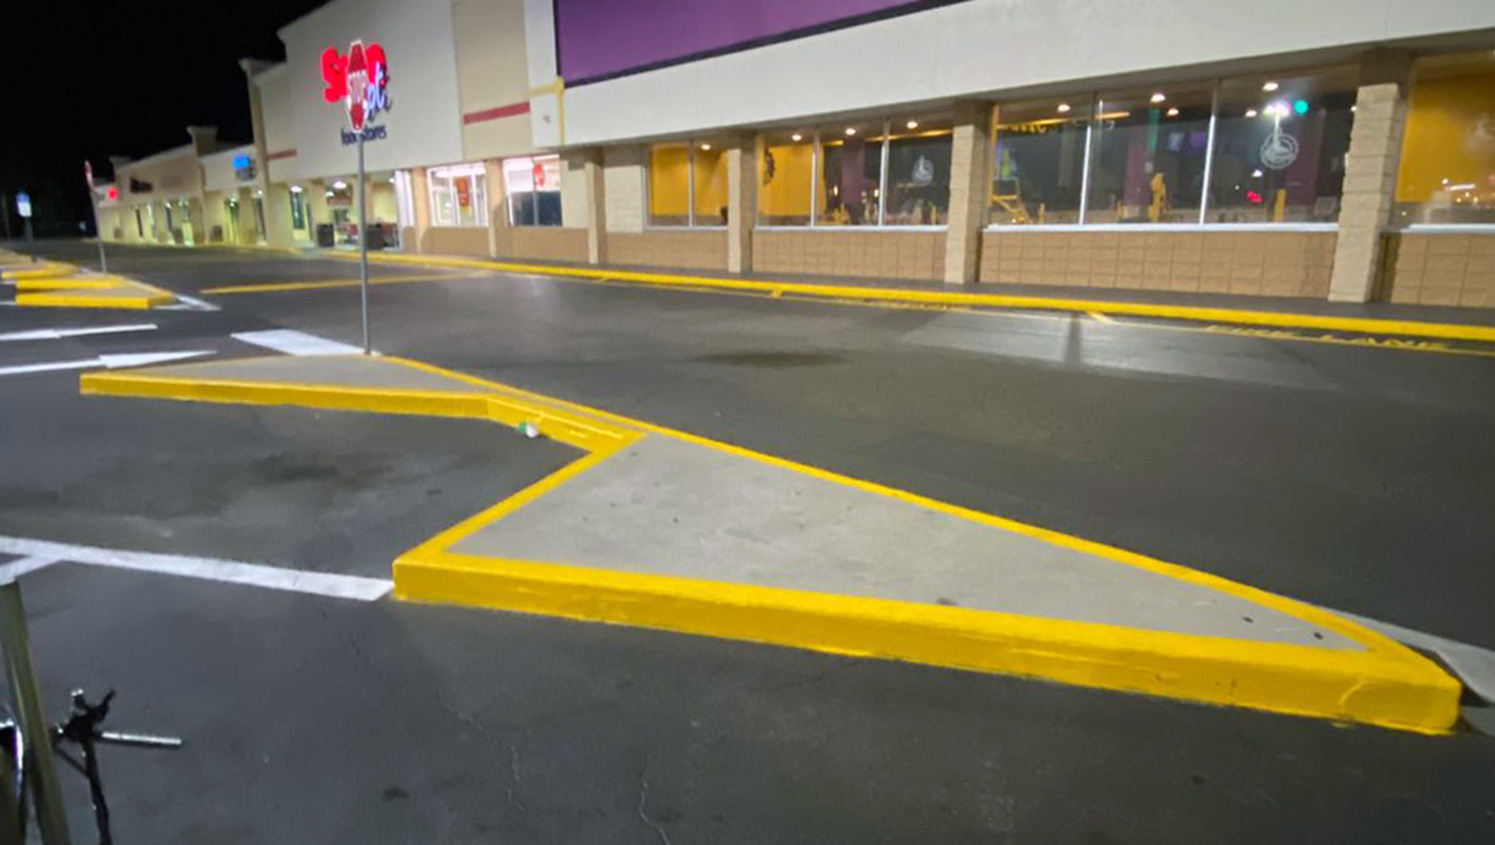 new parking lot markings at a Tampa, FL shopping plaza